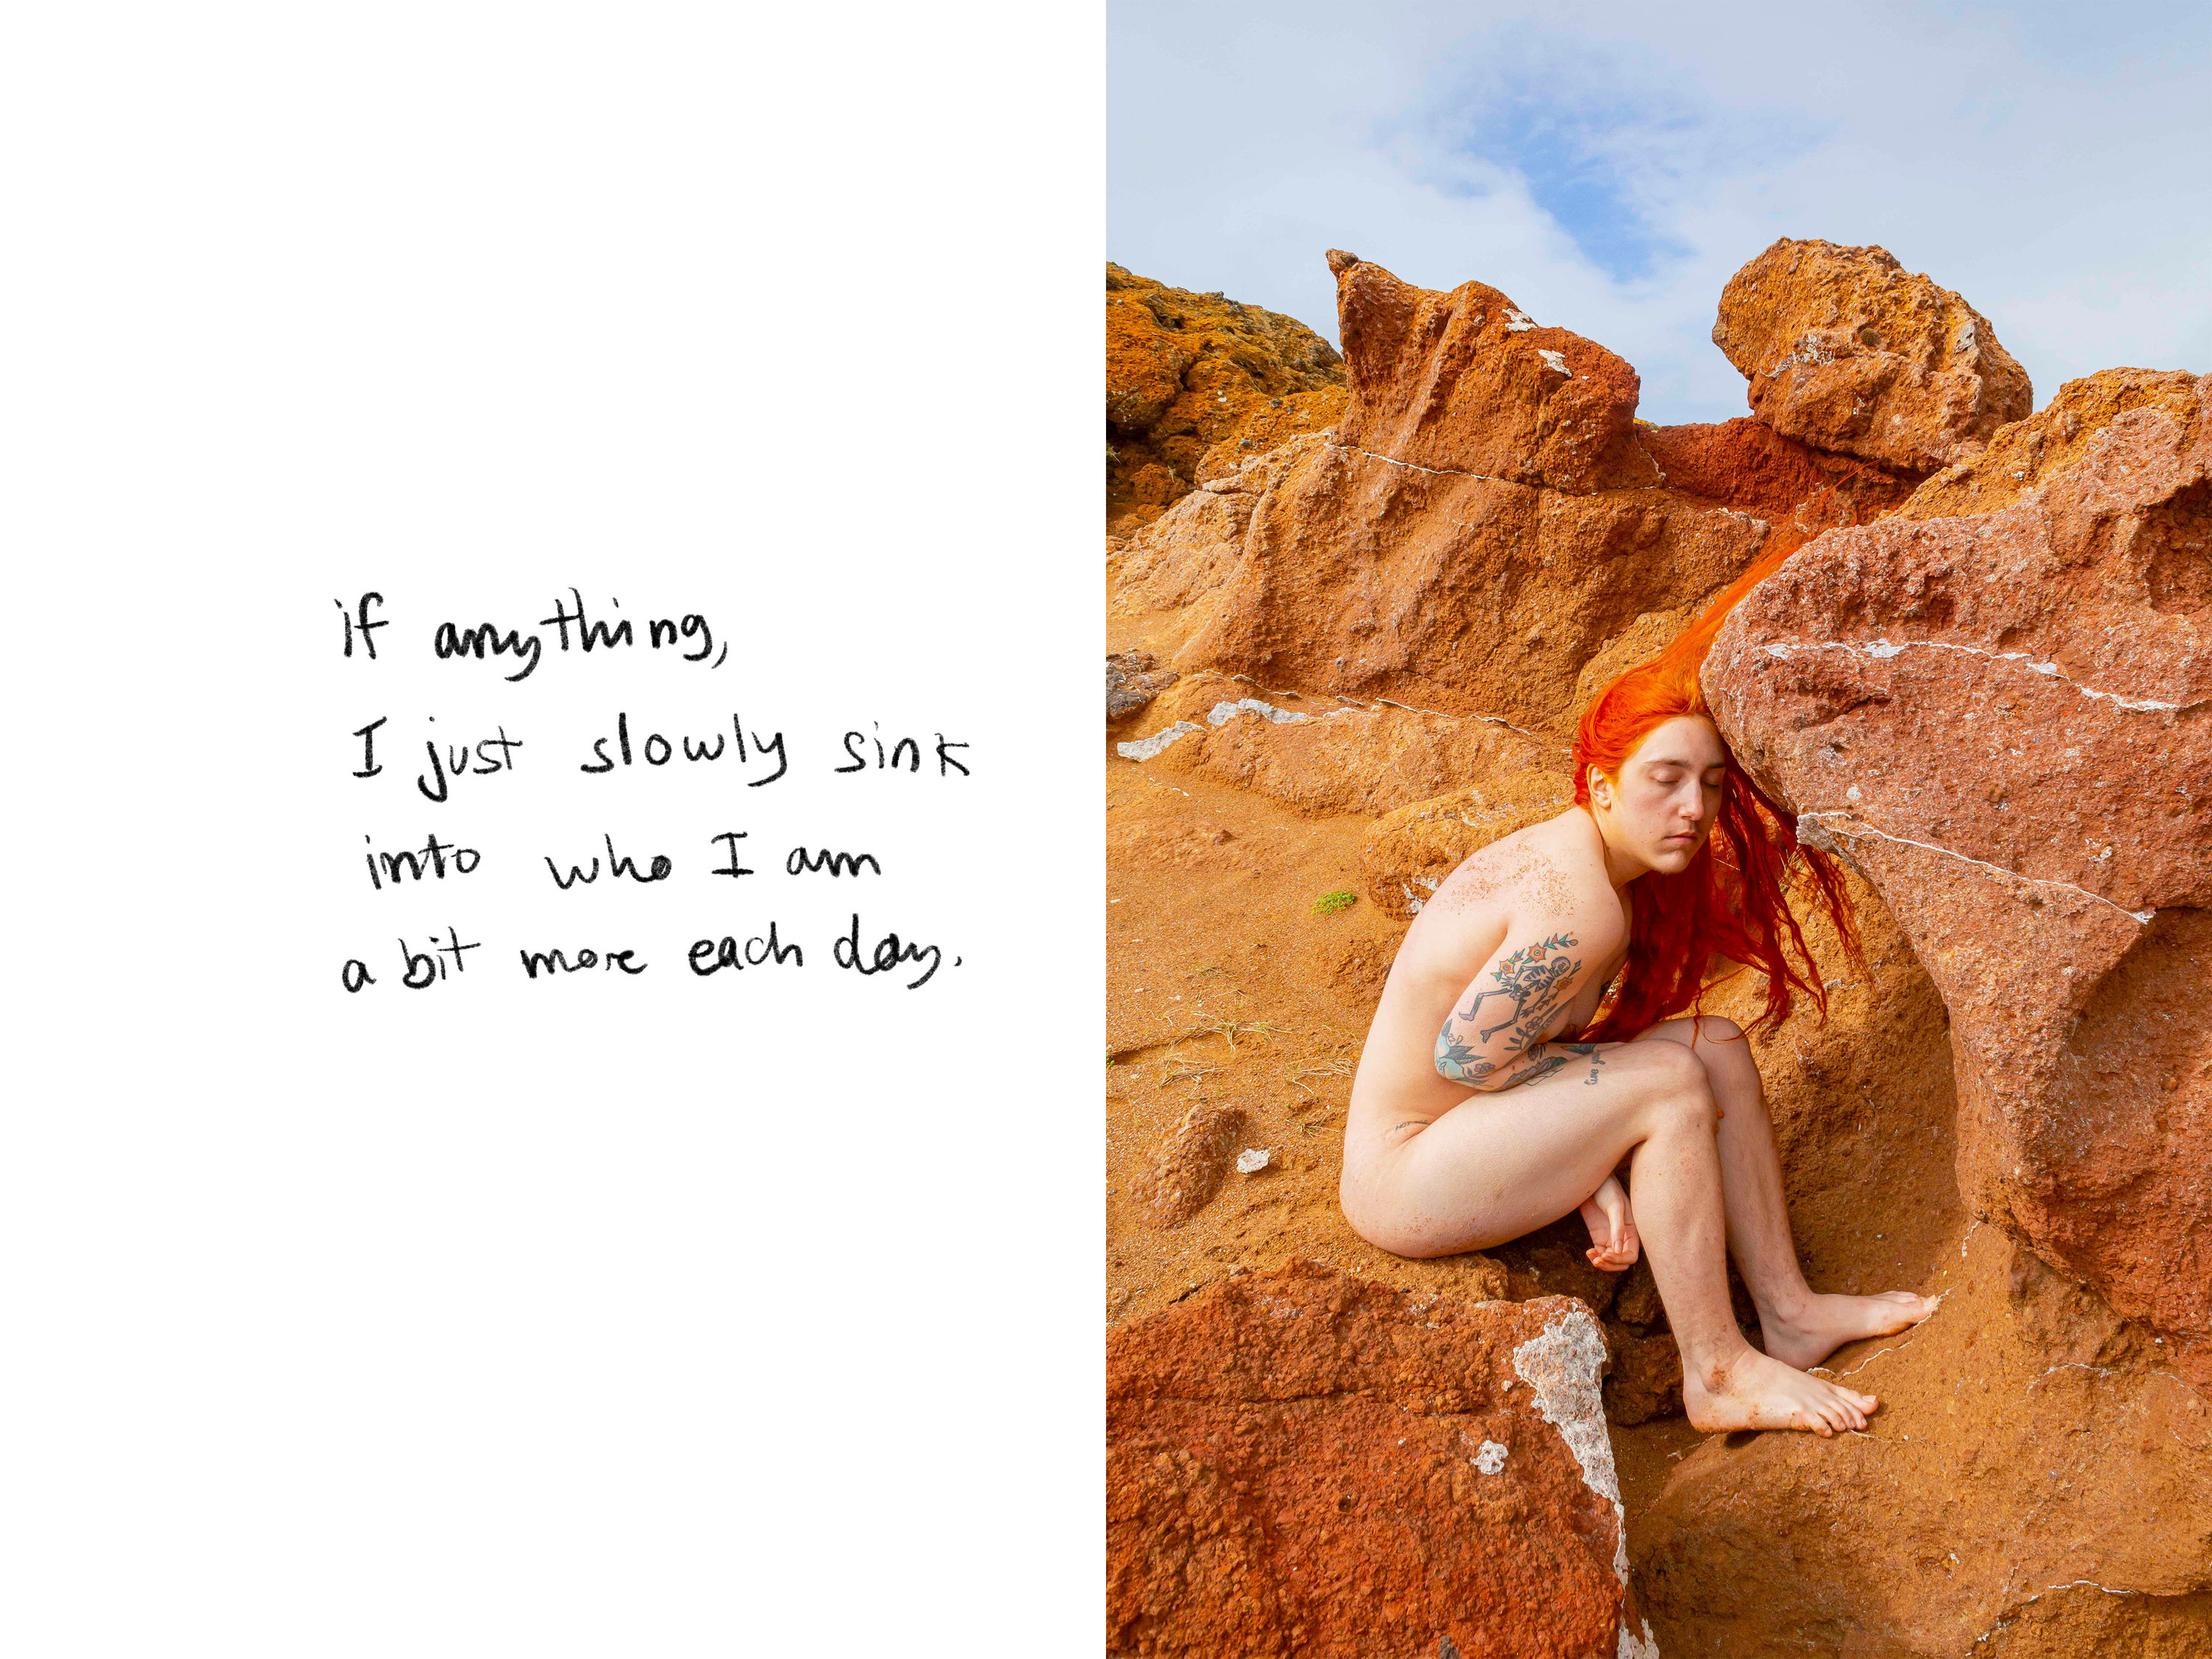 The artist nude on rocks with text on the image reading, &quot;if anything I just slowly sink into who I am a bit more each day&quot;